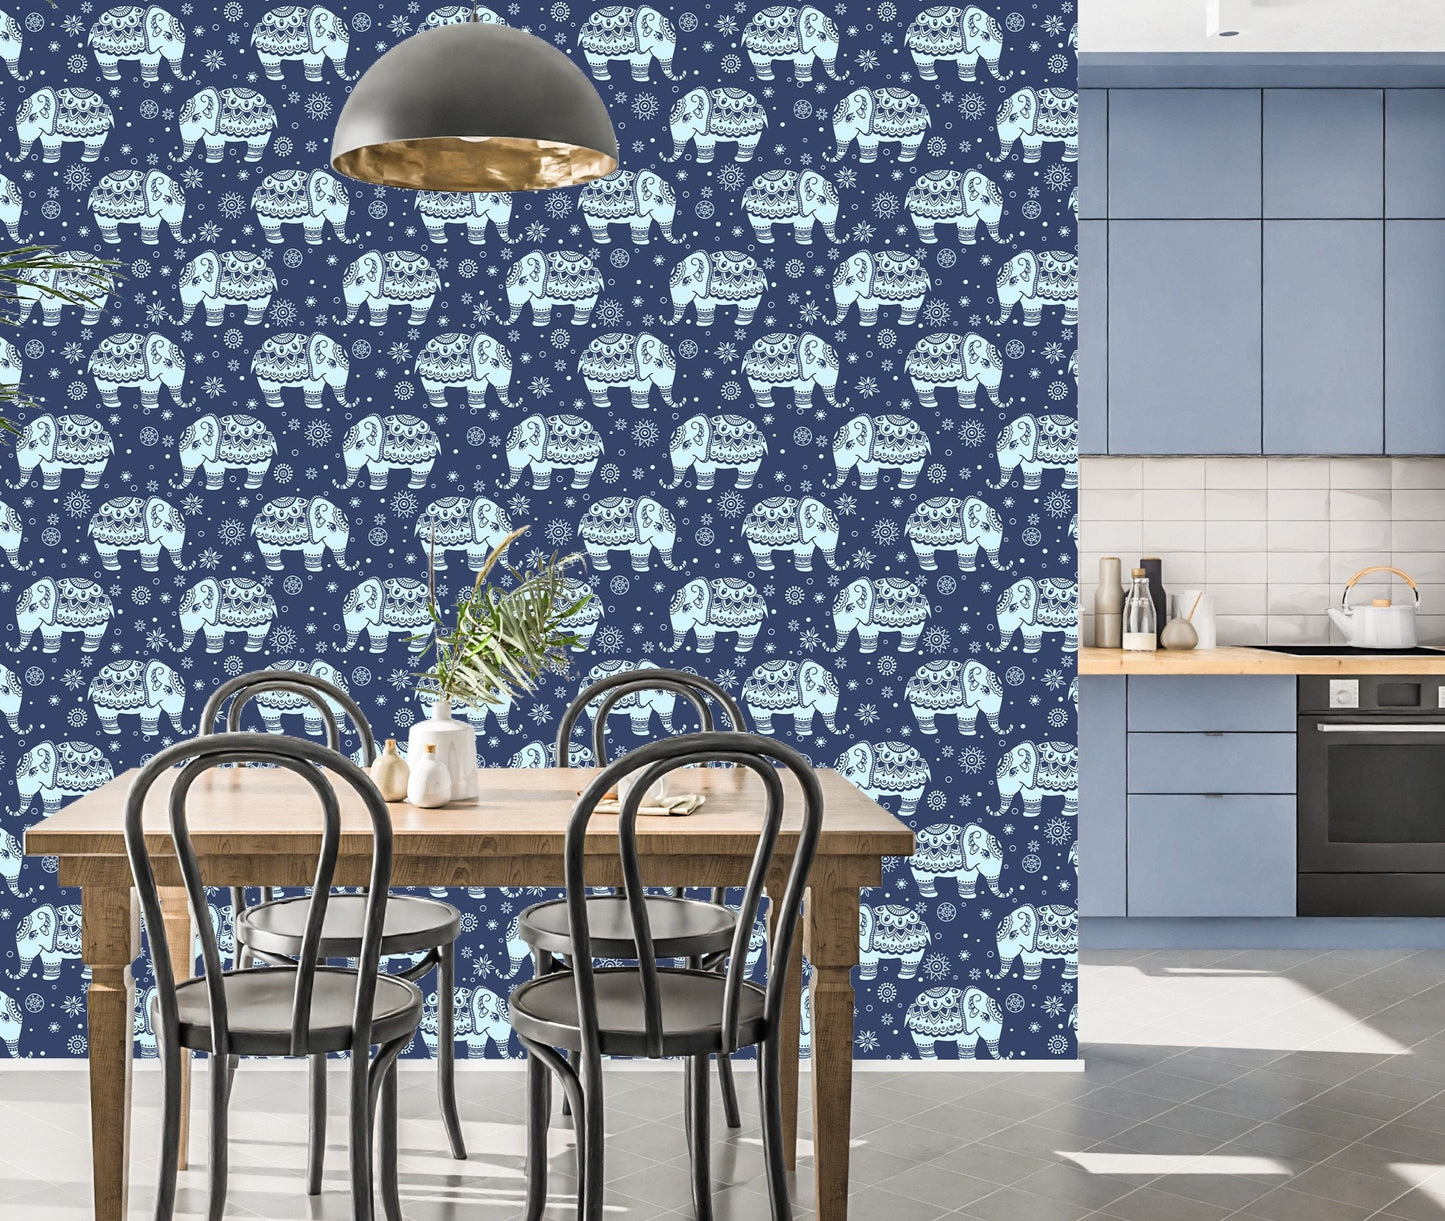 Elephant Wallpaper Peel and Stick, Indian Wallpaper, Animal Wallpaper, Removable Wall Paper